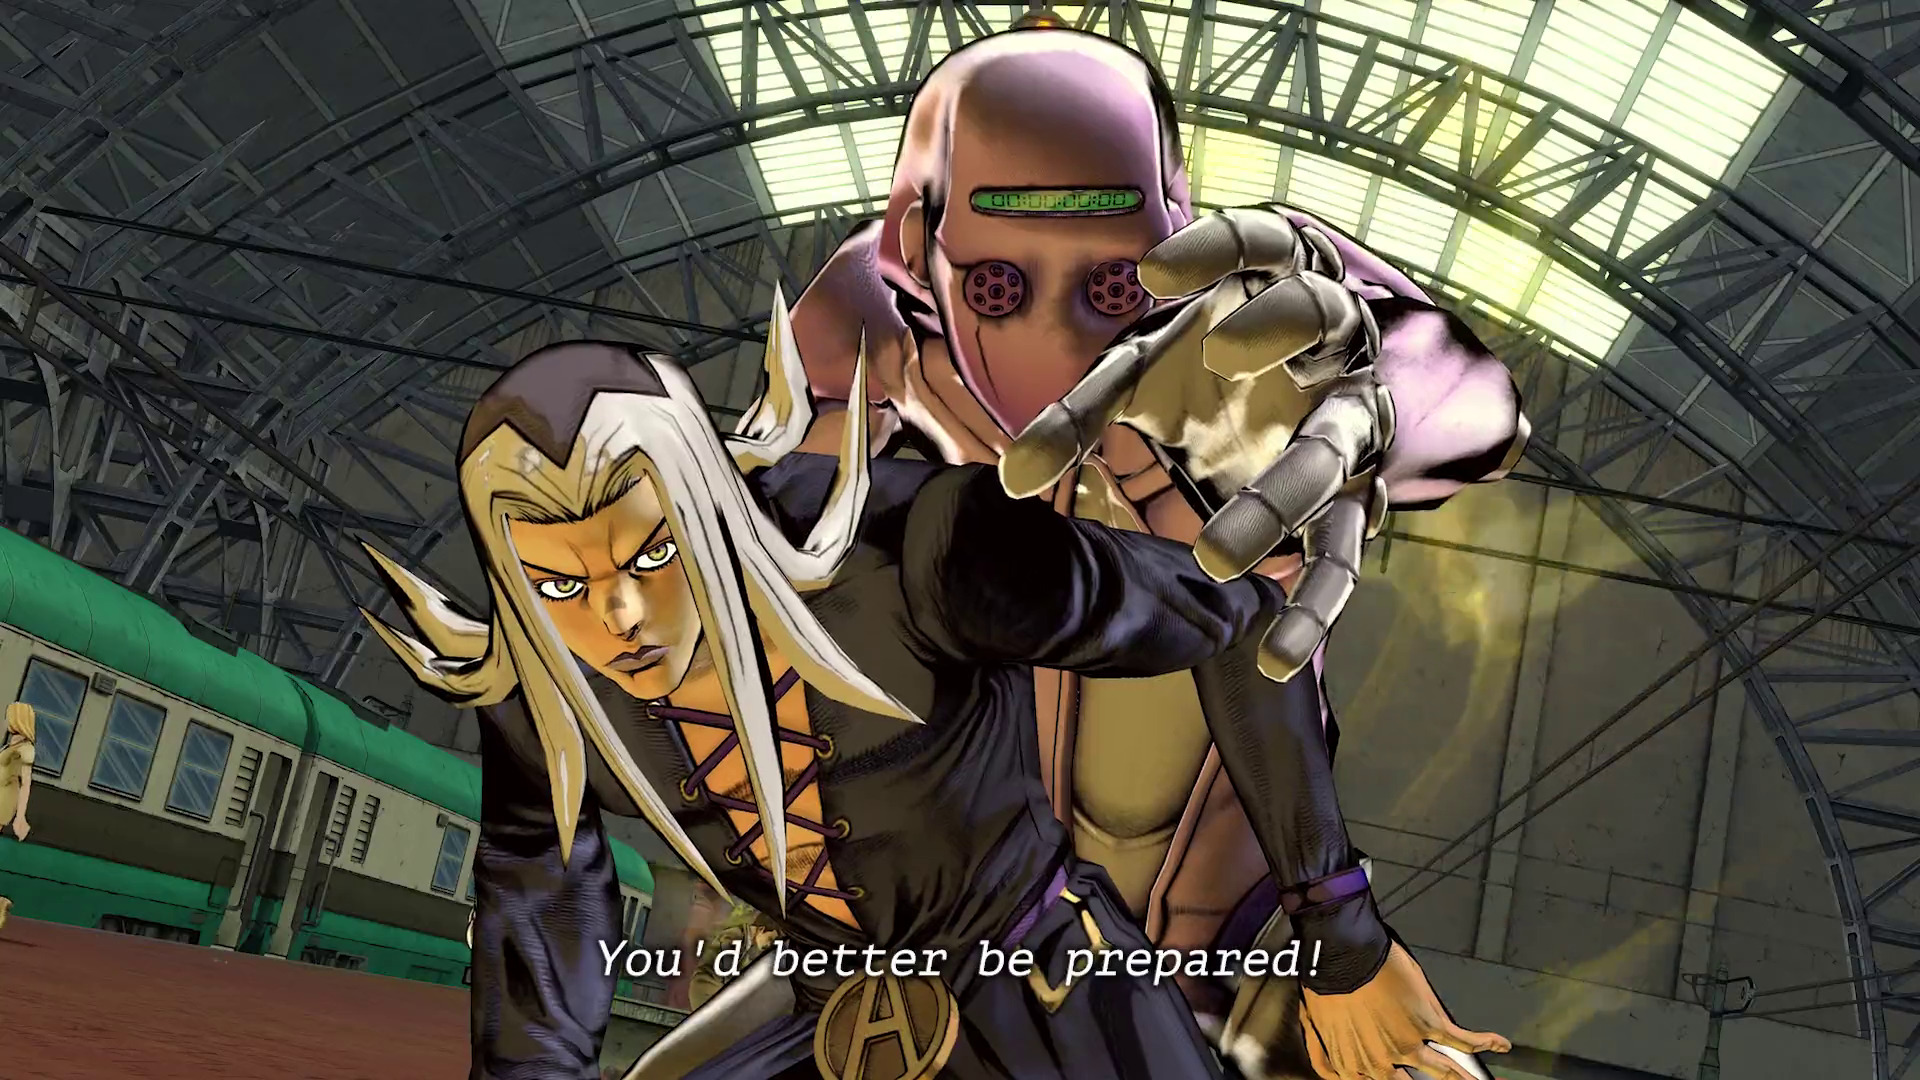 Jojo's Bizzare Adventure Available for Xbox 360 and Sony PS3 in